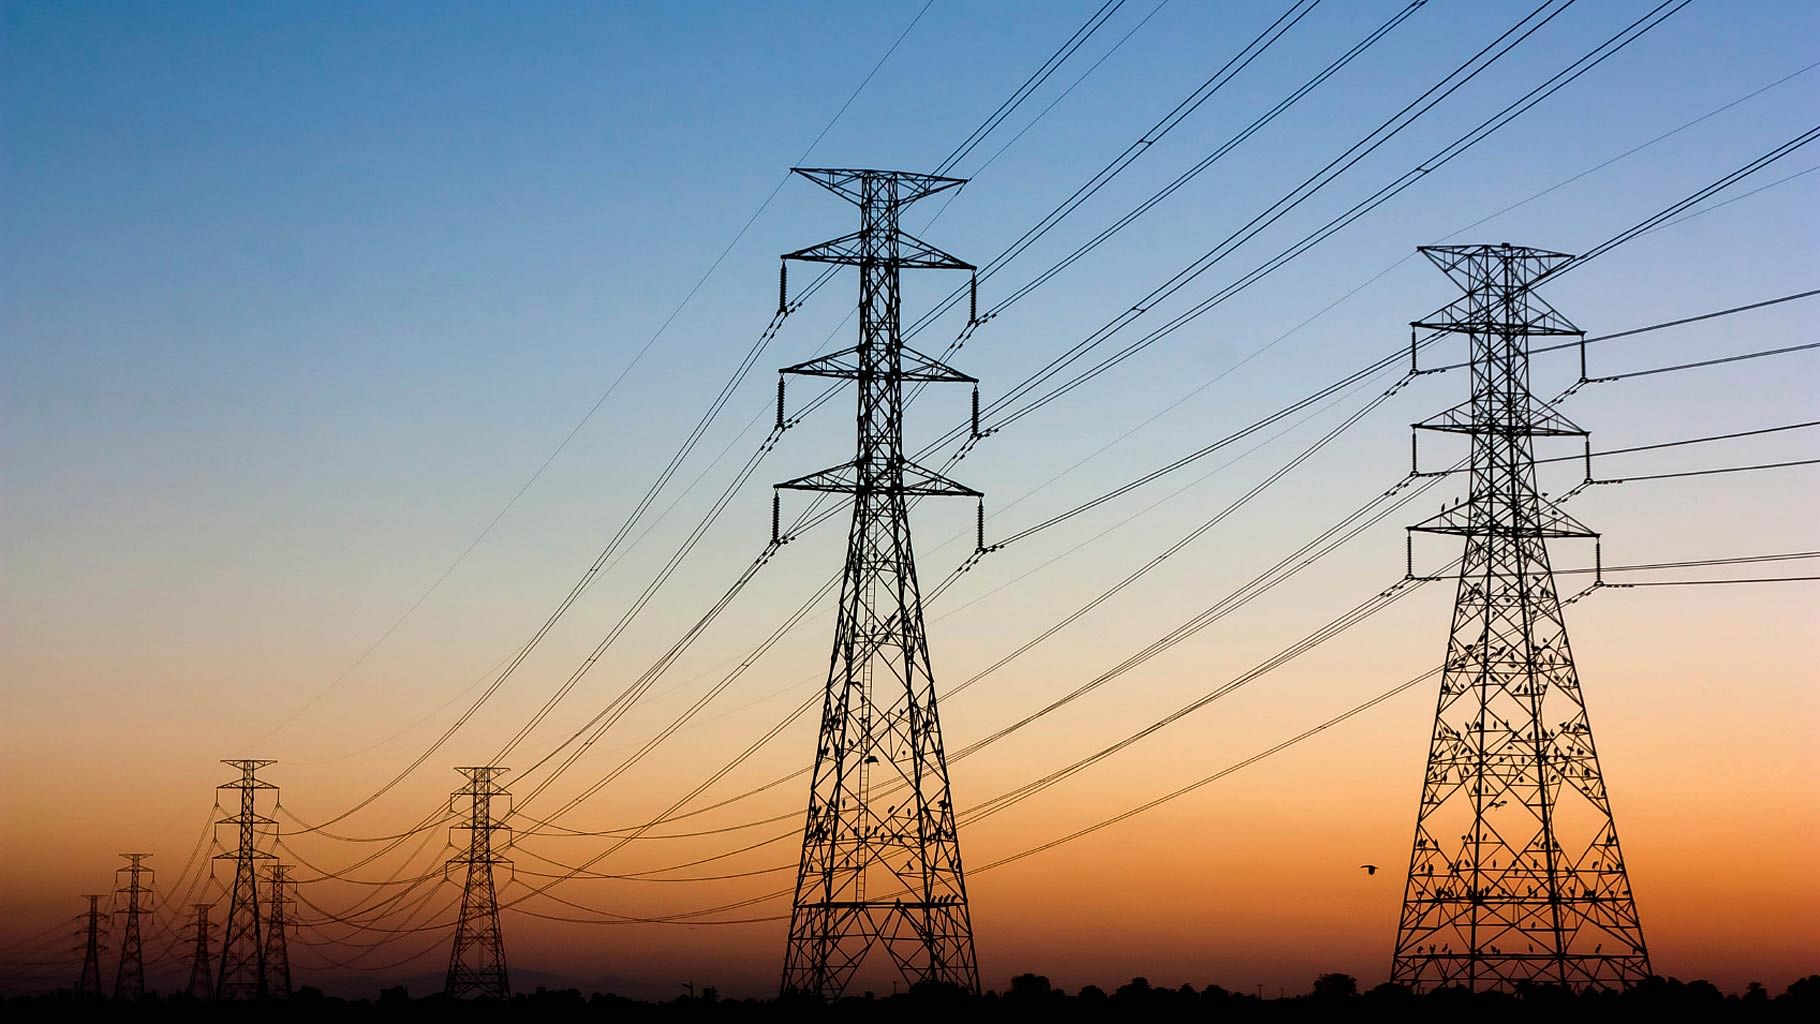 India and Nepal have proposed construction of six power corridors to ensure energy trade. (Photo: iStockphoto)